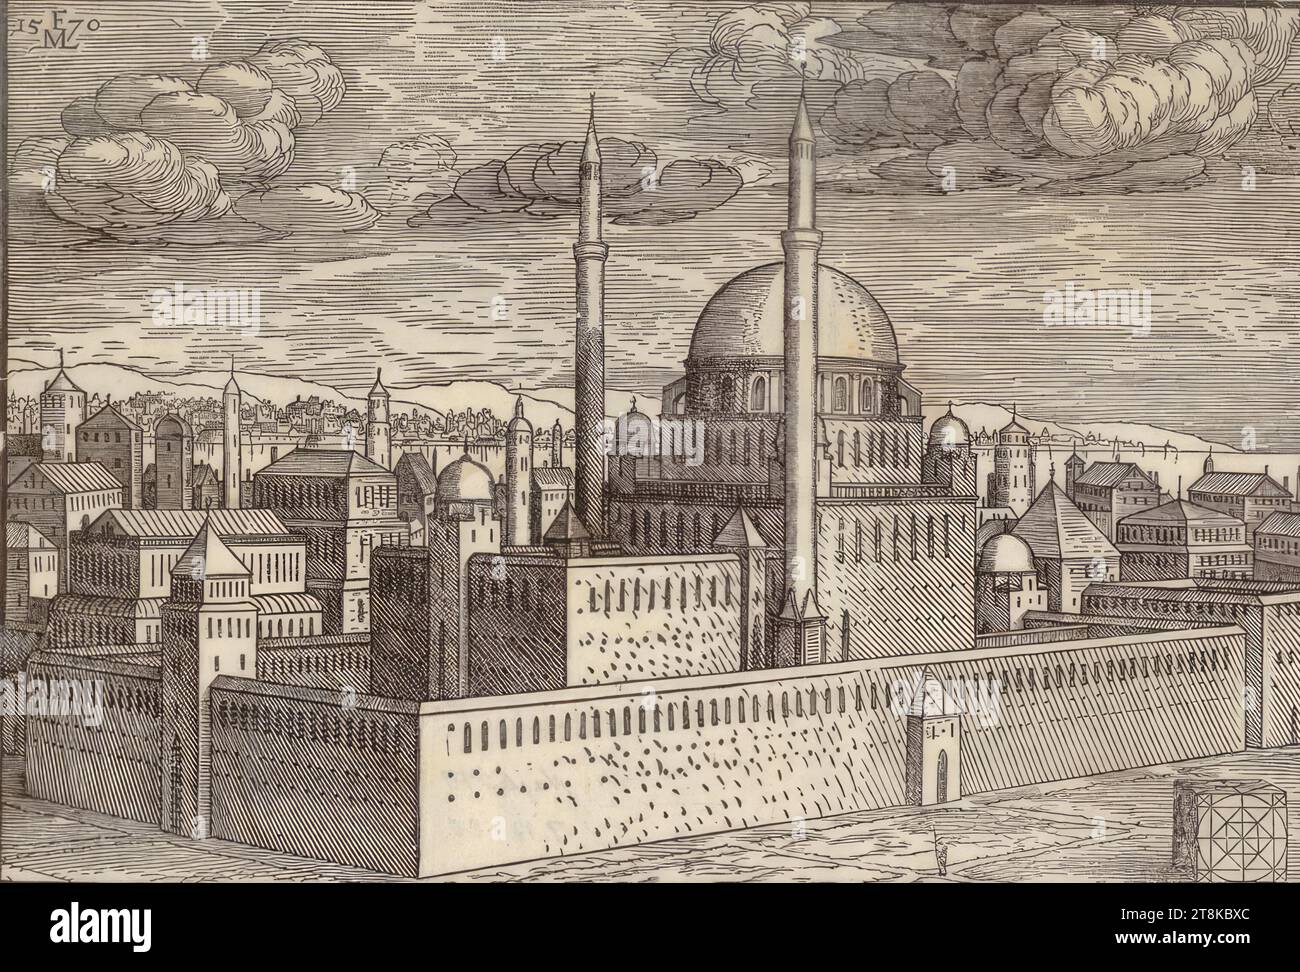 A Turkish city, divided into two halves by the river, well-crafted and cut figures Anno 1619, Melchior Lorch, Flensburg around 1527 - after 1583 Copenhagen, Rome or Hamburg, 1570, print, woodcut, sheet: 18 x 25.7cm Stock Photo